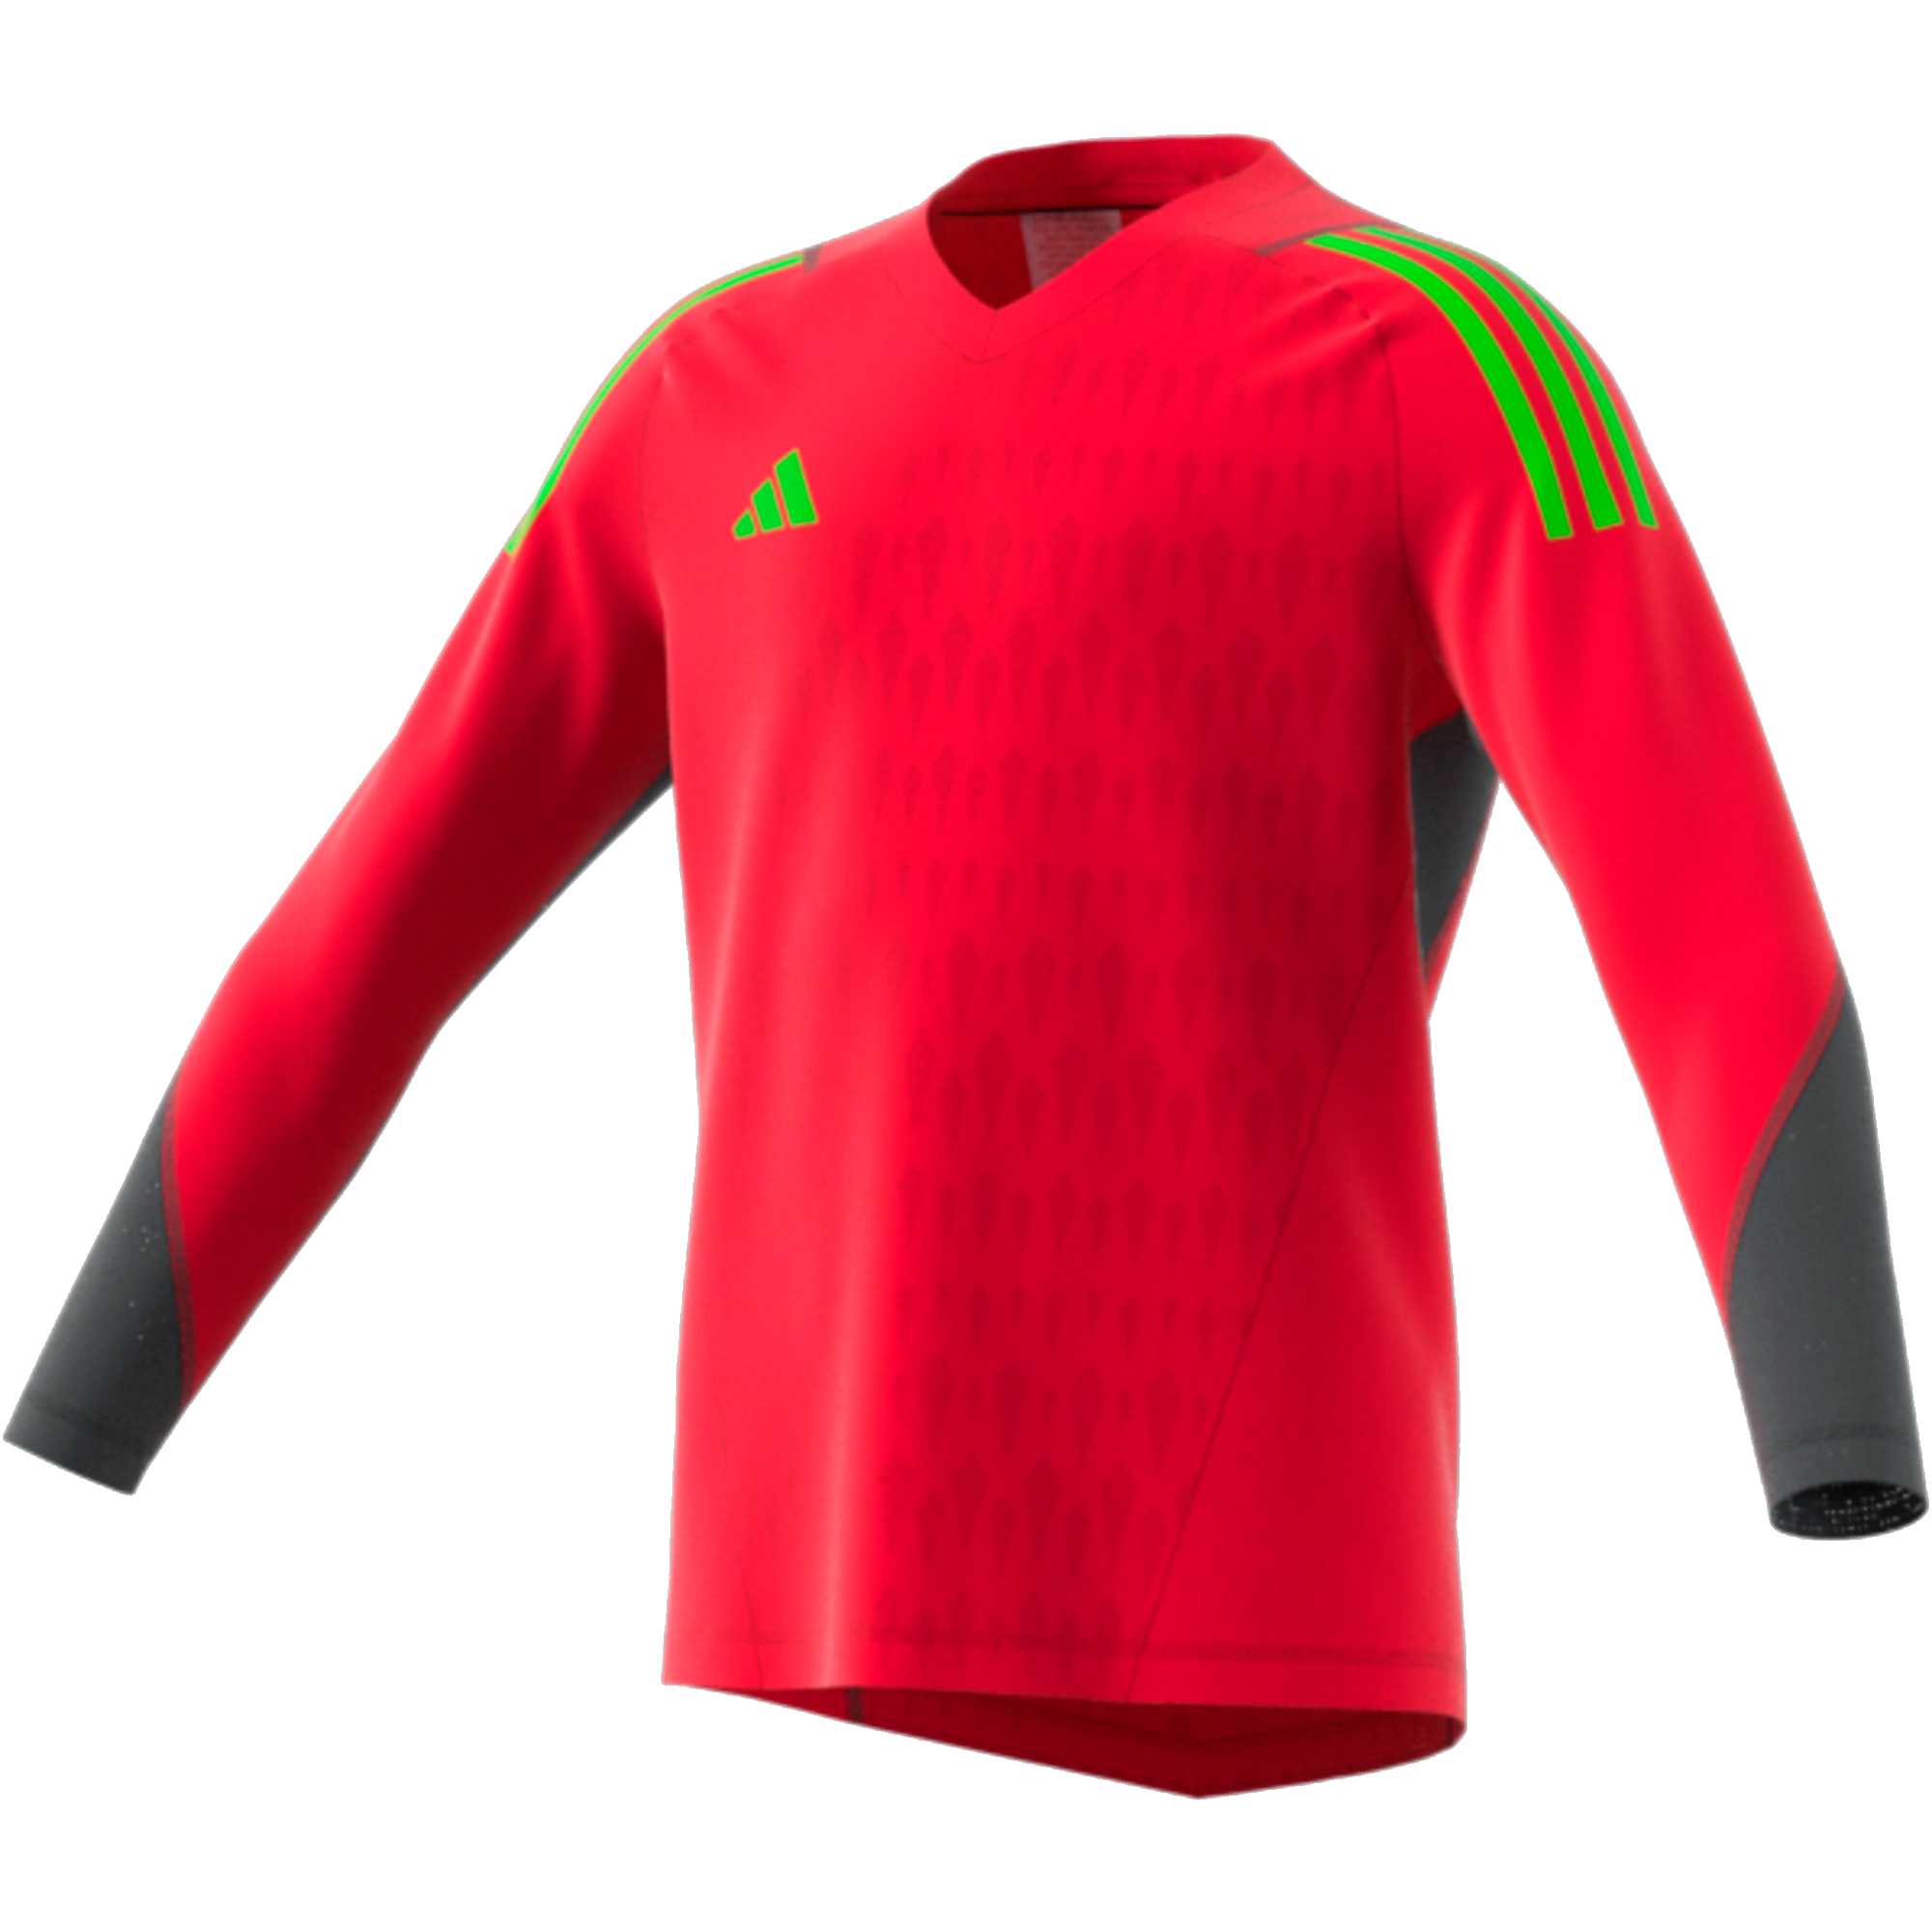 ADIDAS T23 PROMO GK JERSEY LS YOUTH TEAM CORE RED